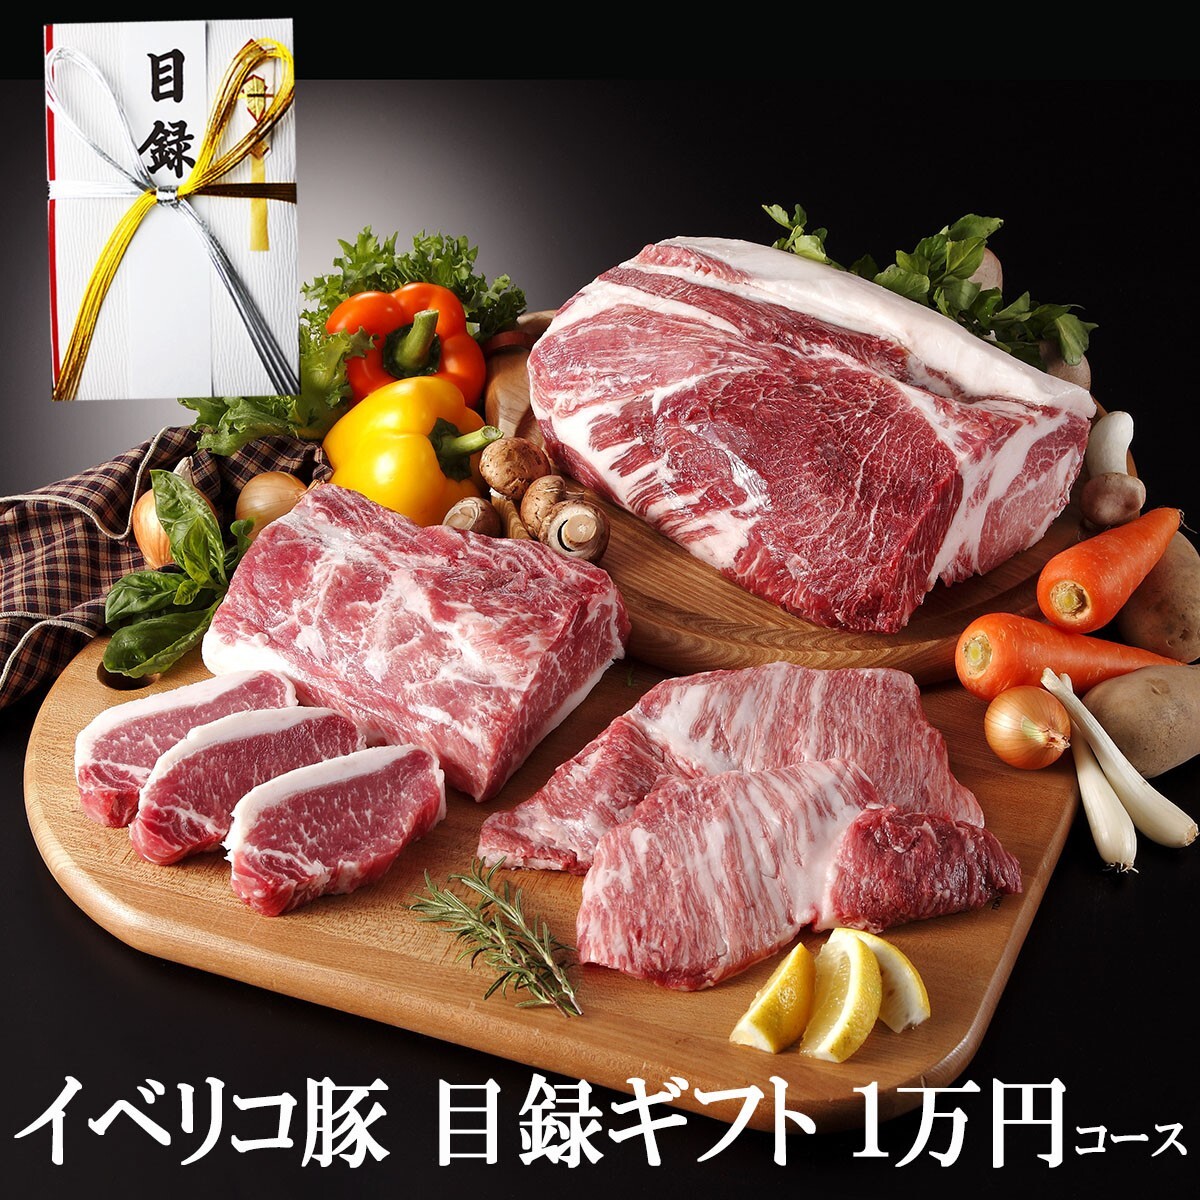  list gift ibe Rico pig list gift 1 ten thousand jpy course set panel attaching Golf competition . meat high class 